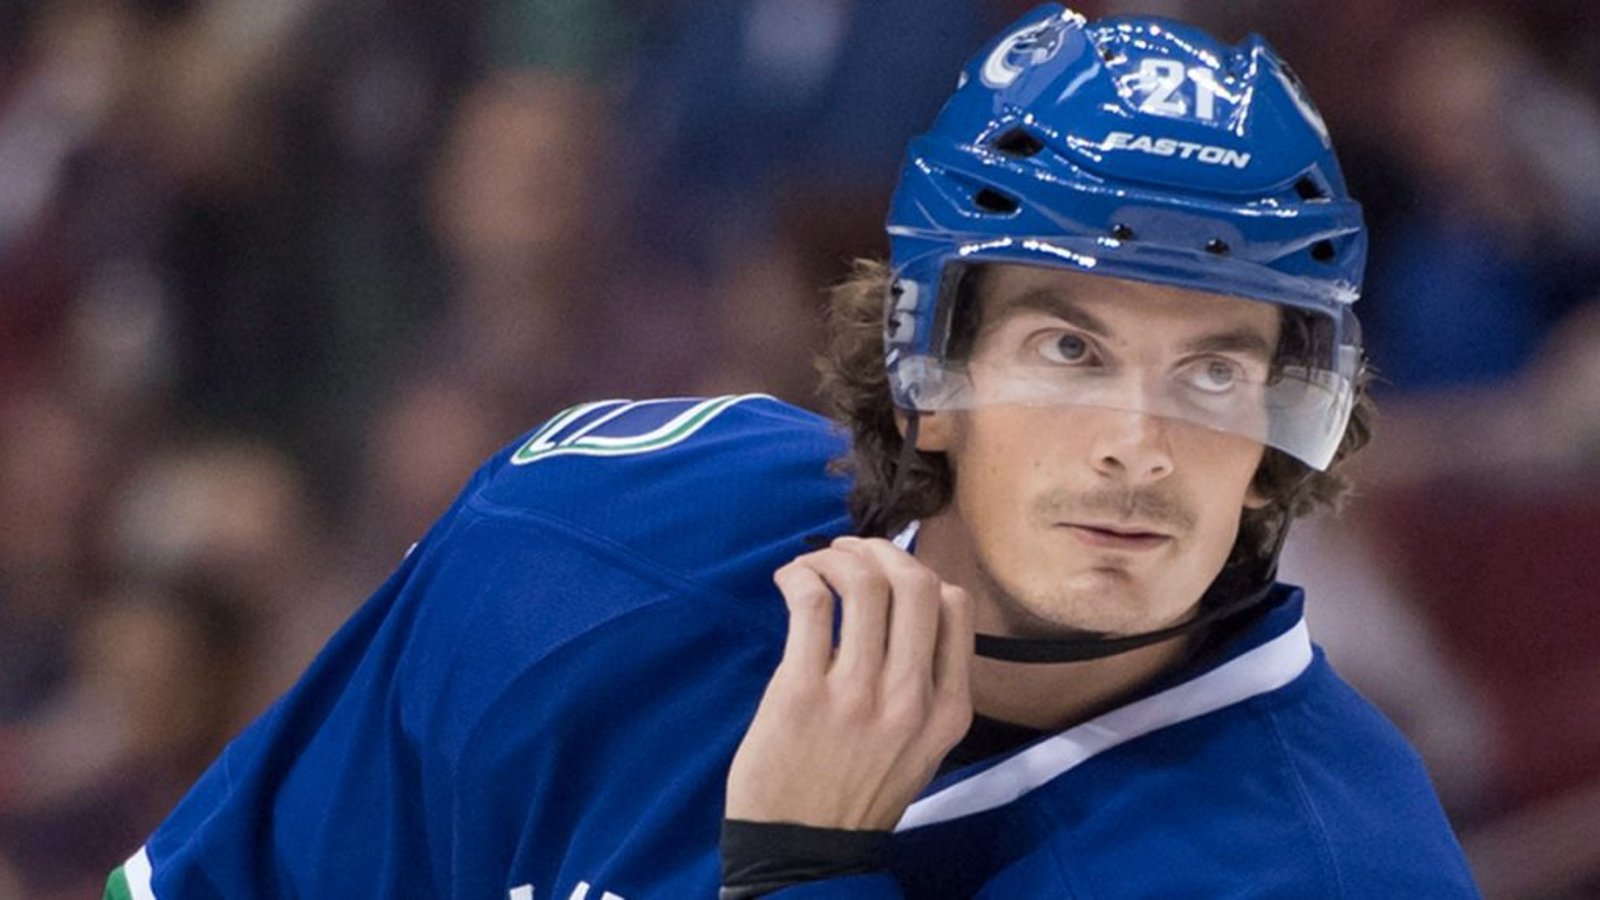 Eriksson blames his coach for poor performance in past seasons